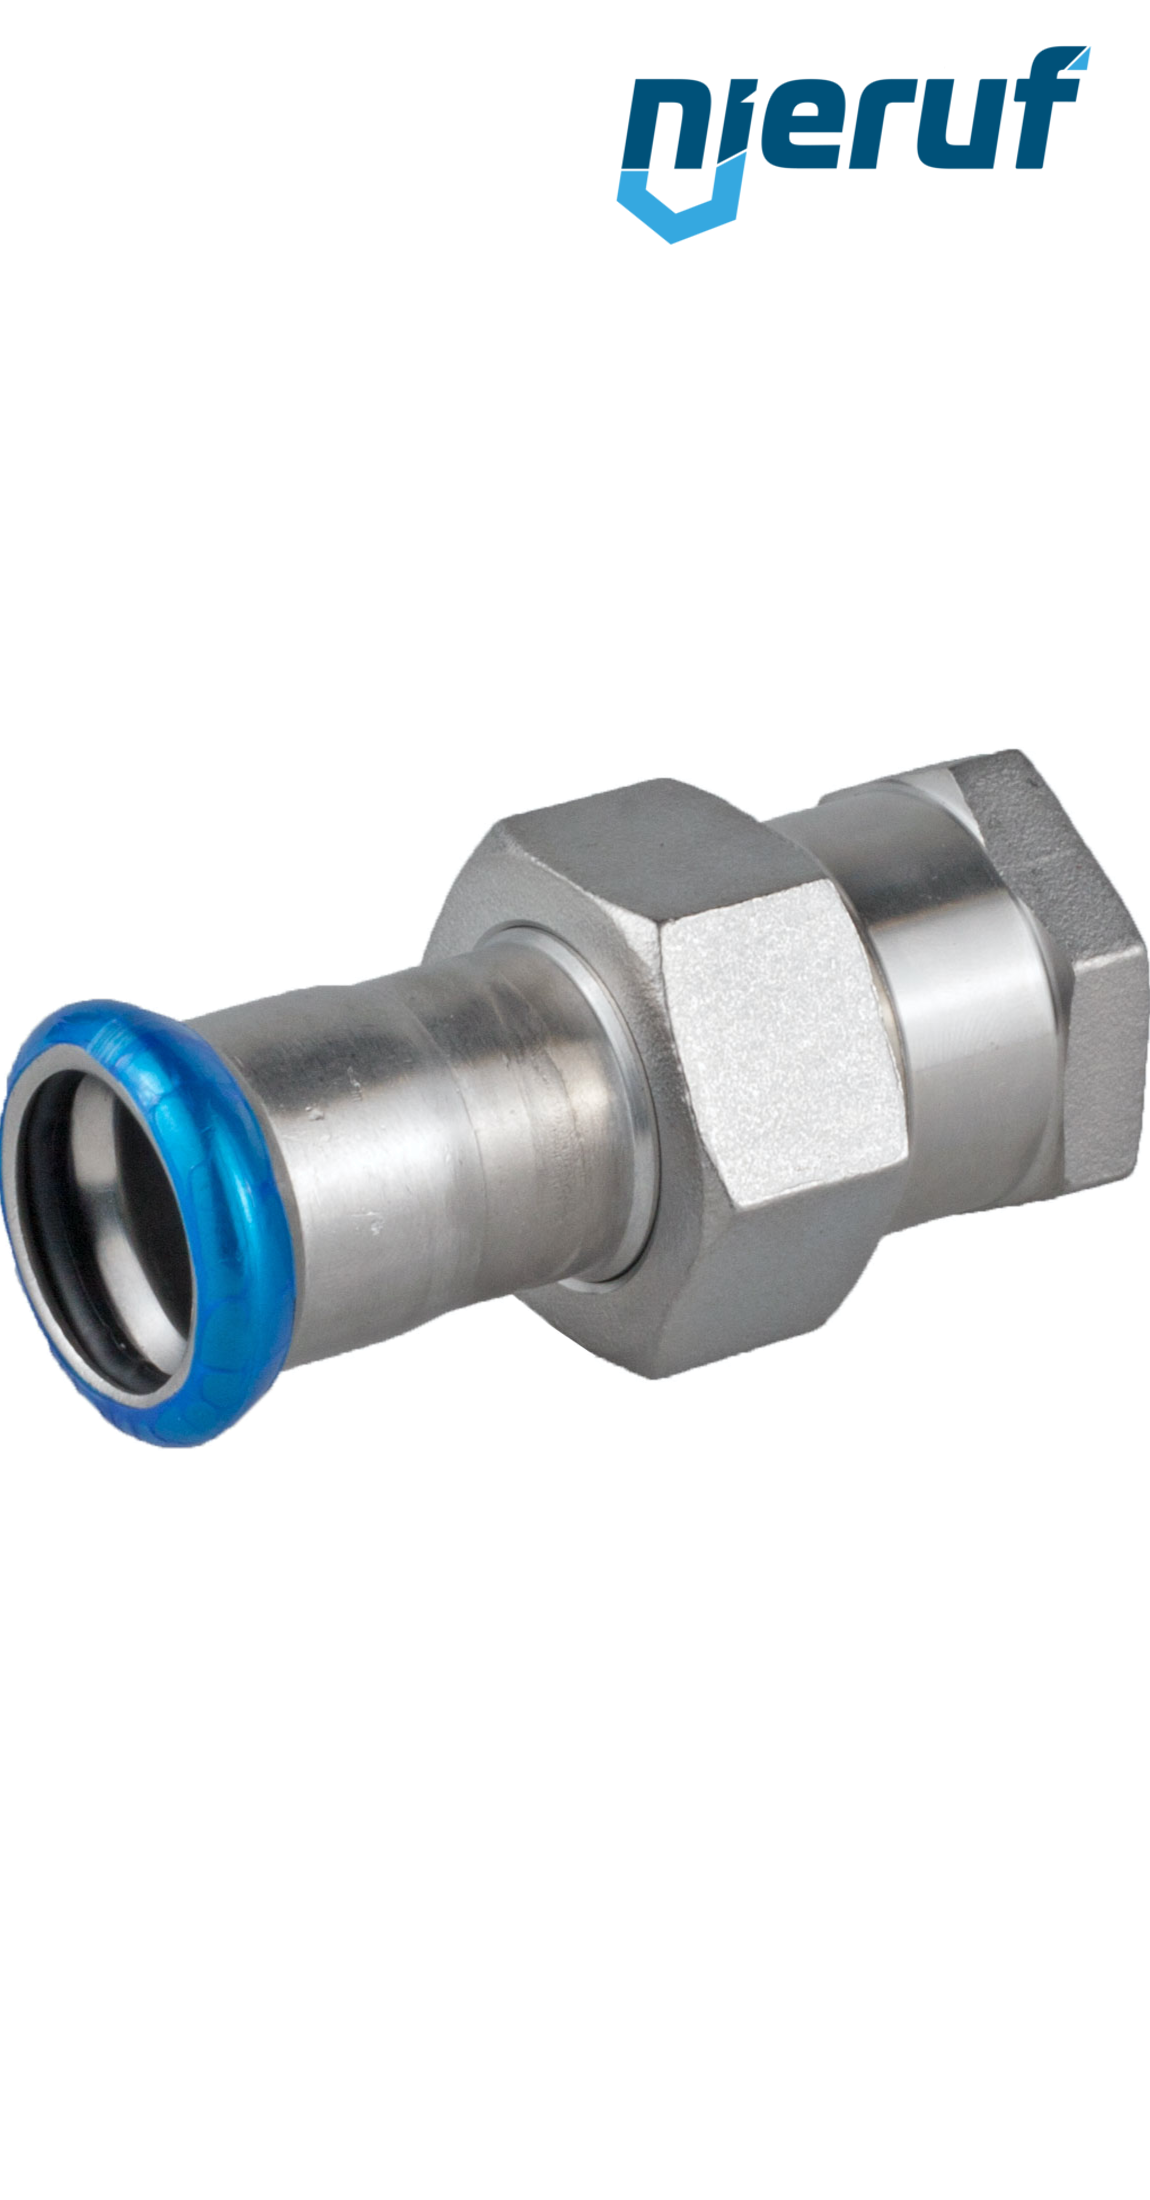 Union Coupling Pressfitting F DN15 - 18,0 mm female thread 1/2" inch stainless steel